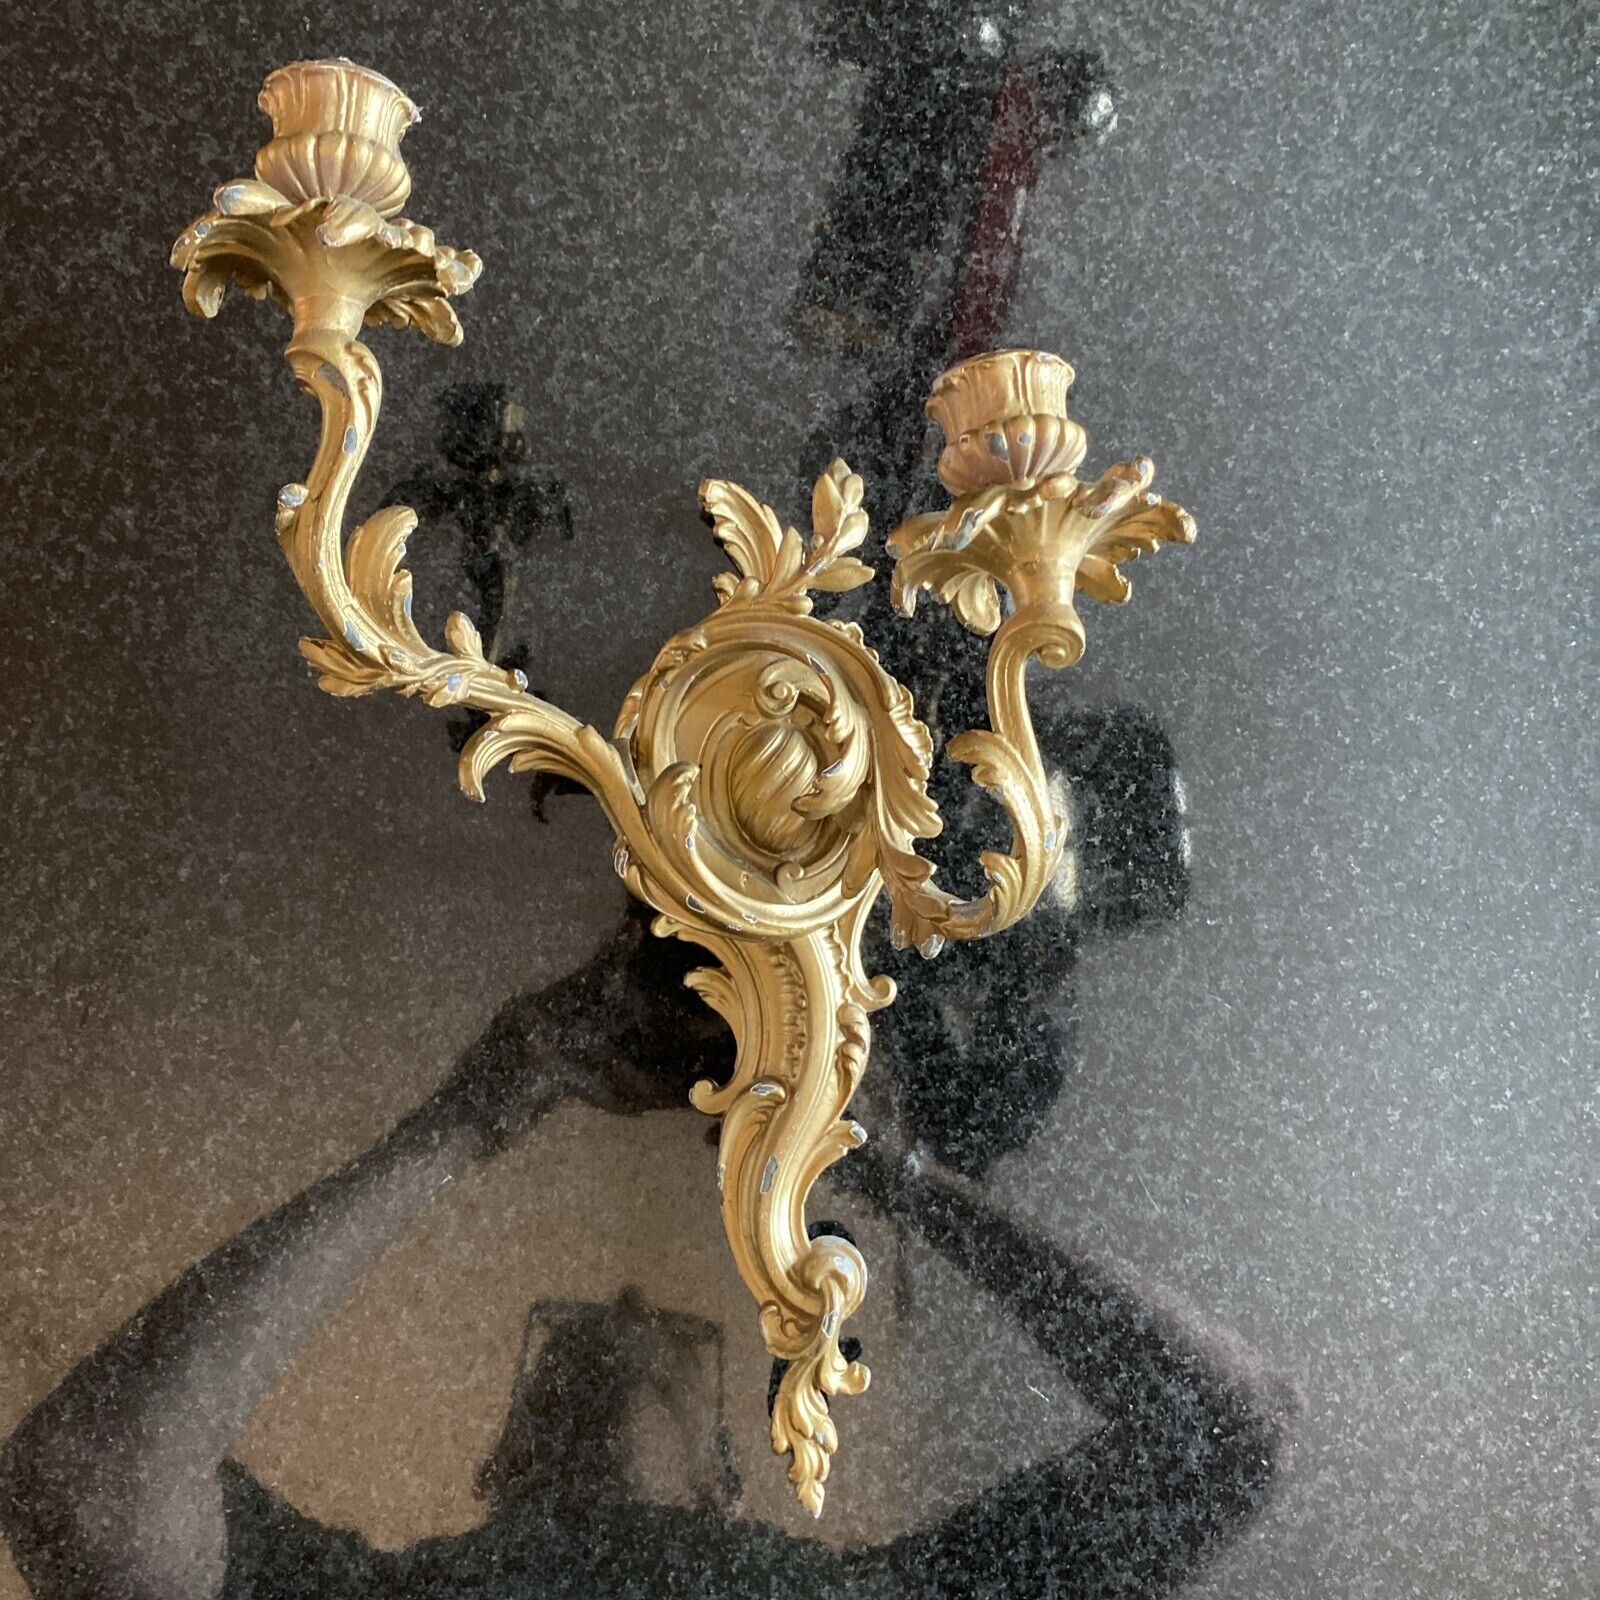 Vintage French Rococo Candle Sconce 